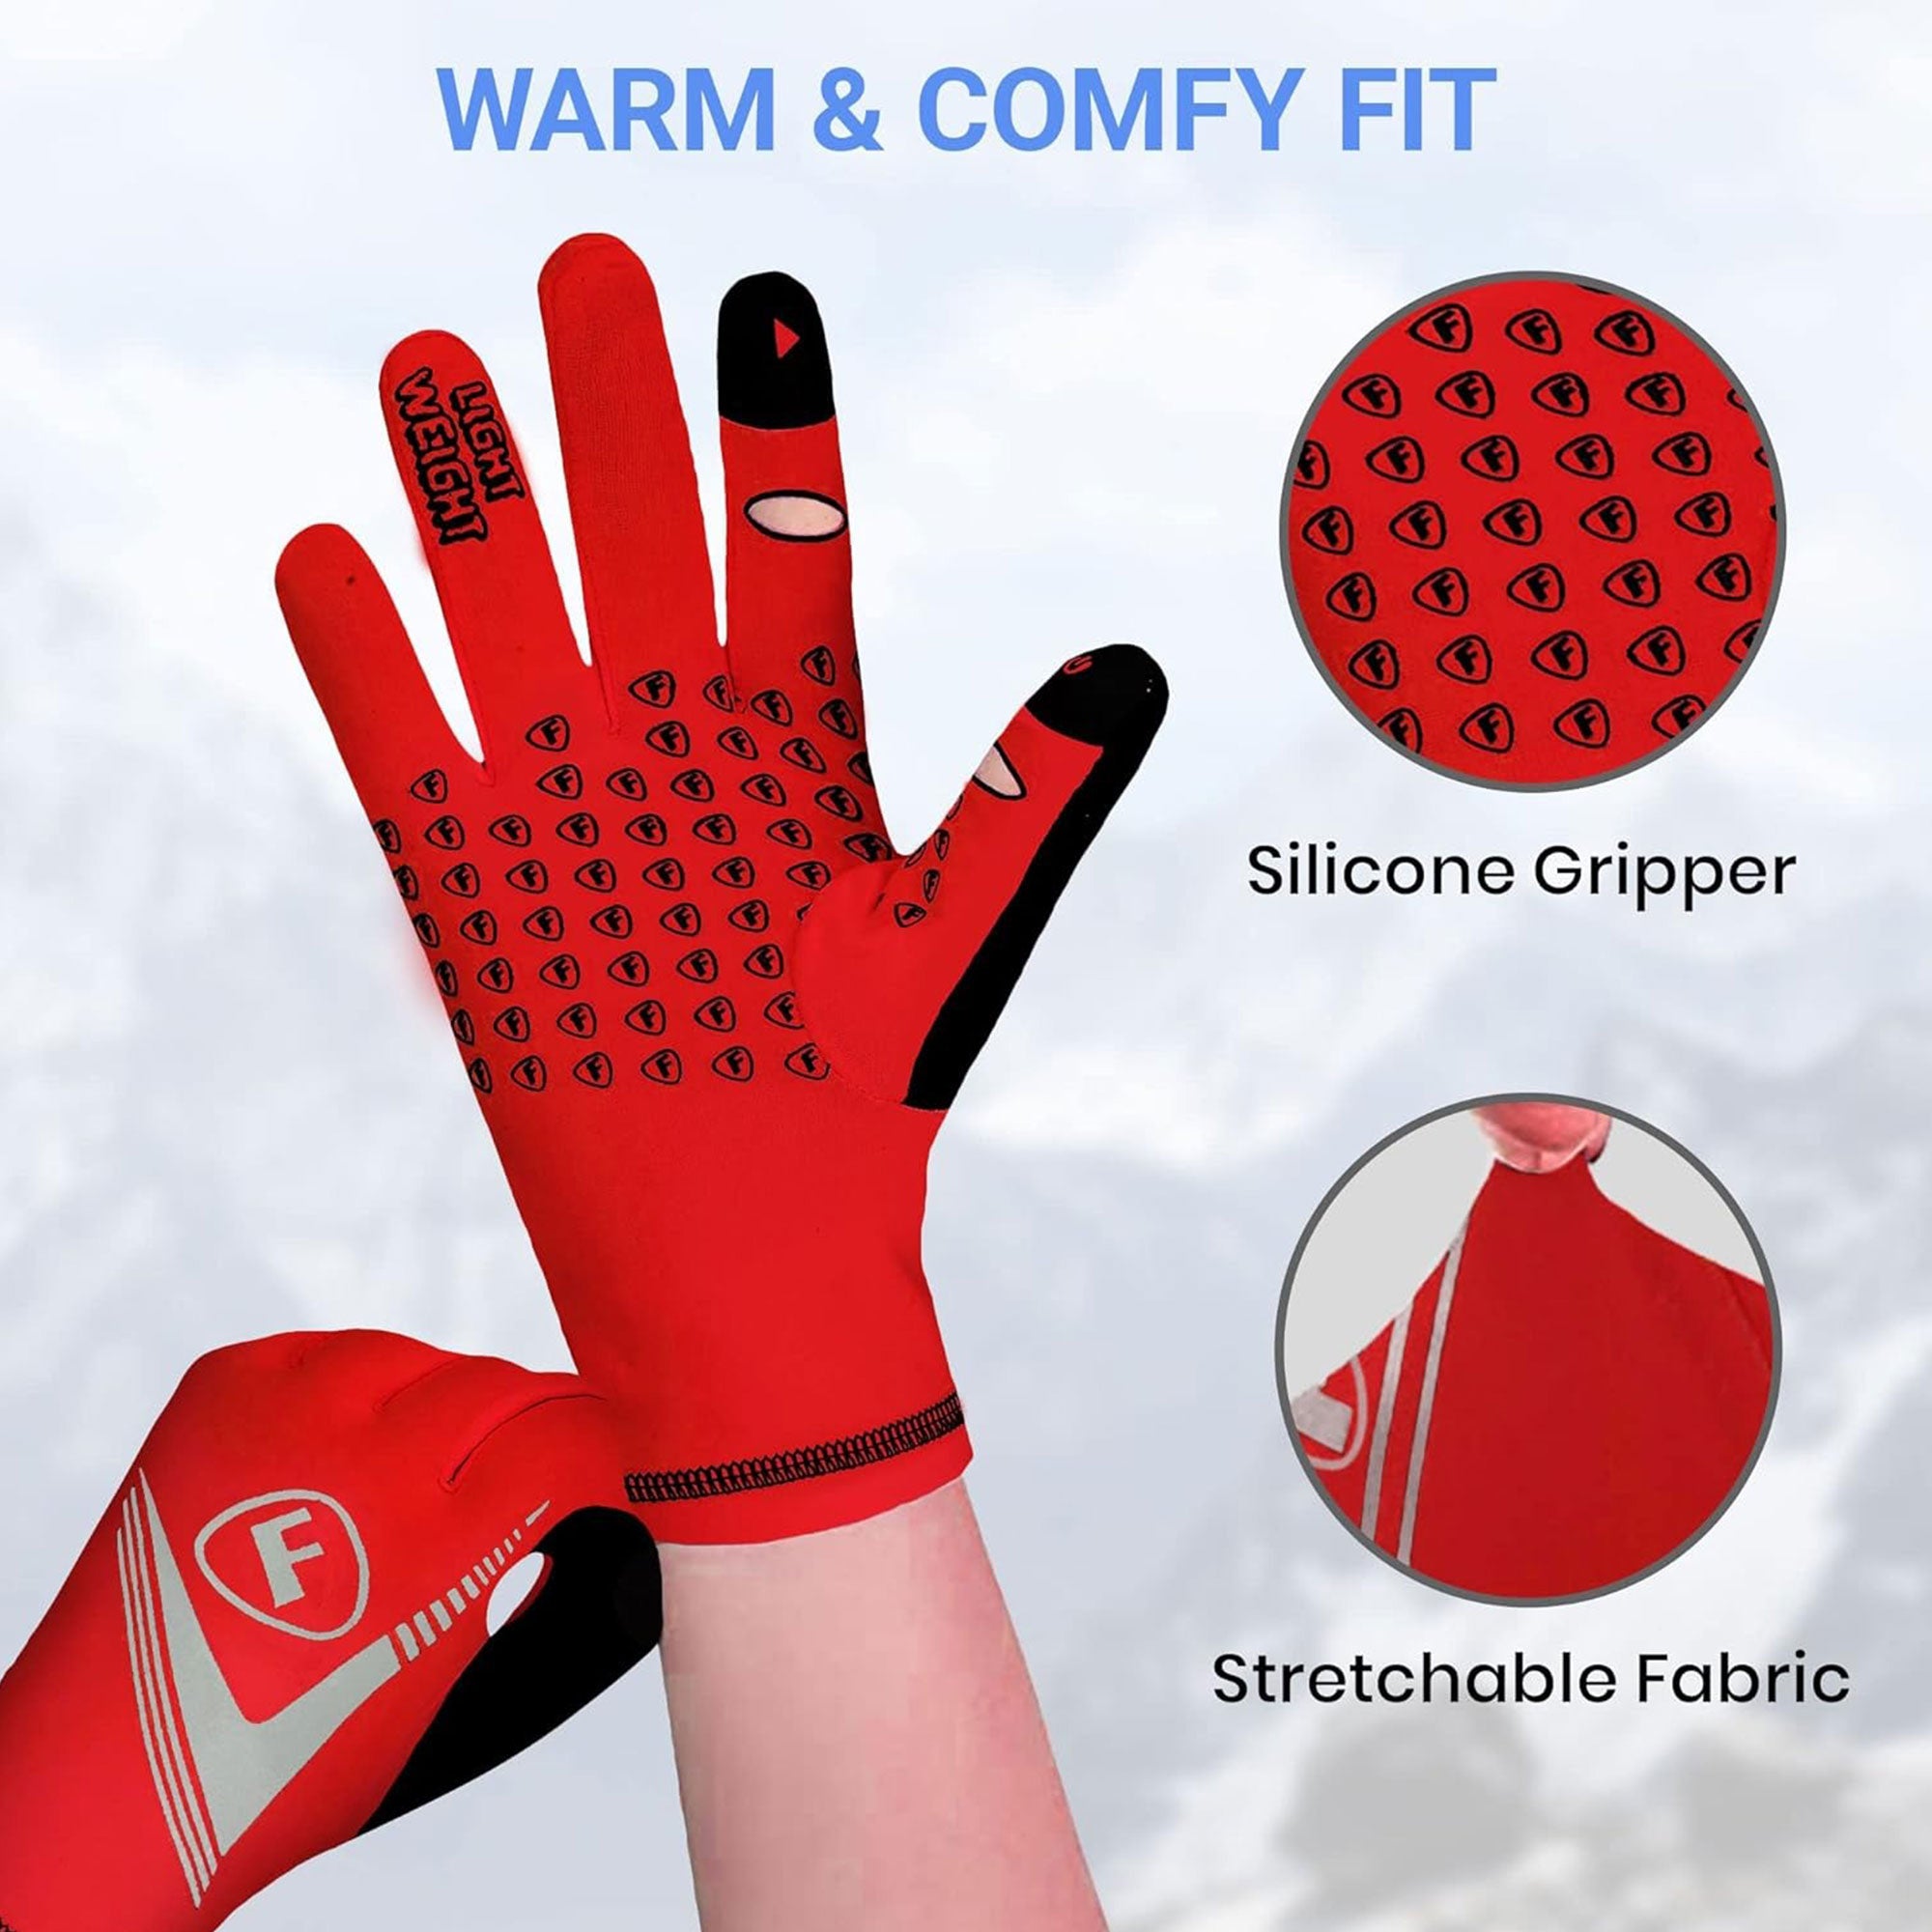 Fdx Red Full Finger Cycling Gloves for Winter MTB Road Bike Reflective Thermal & Touch Screen - Frost